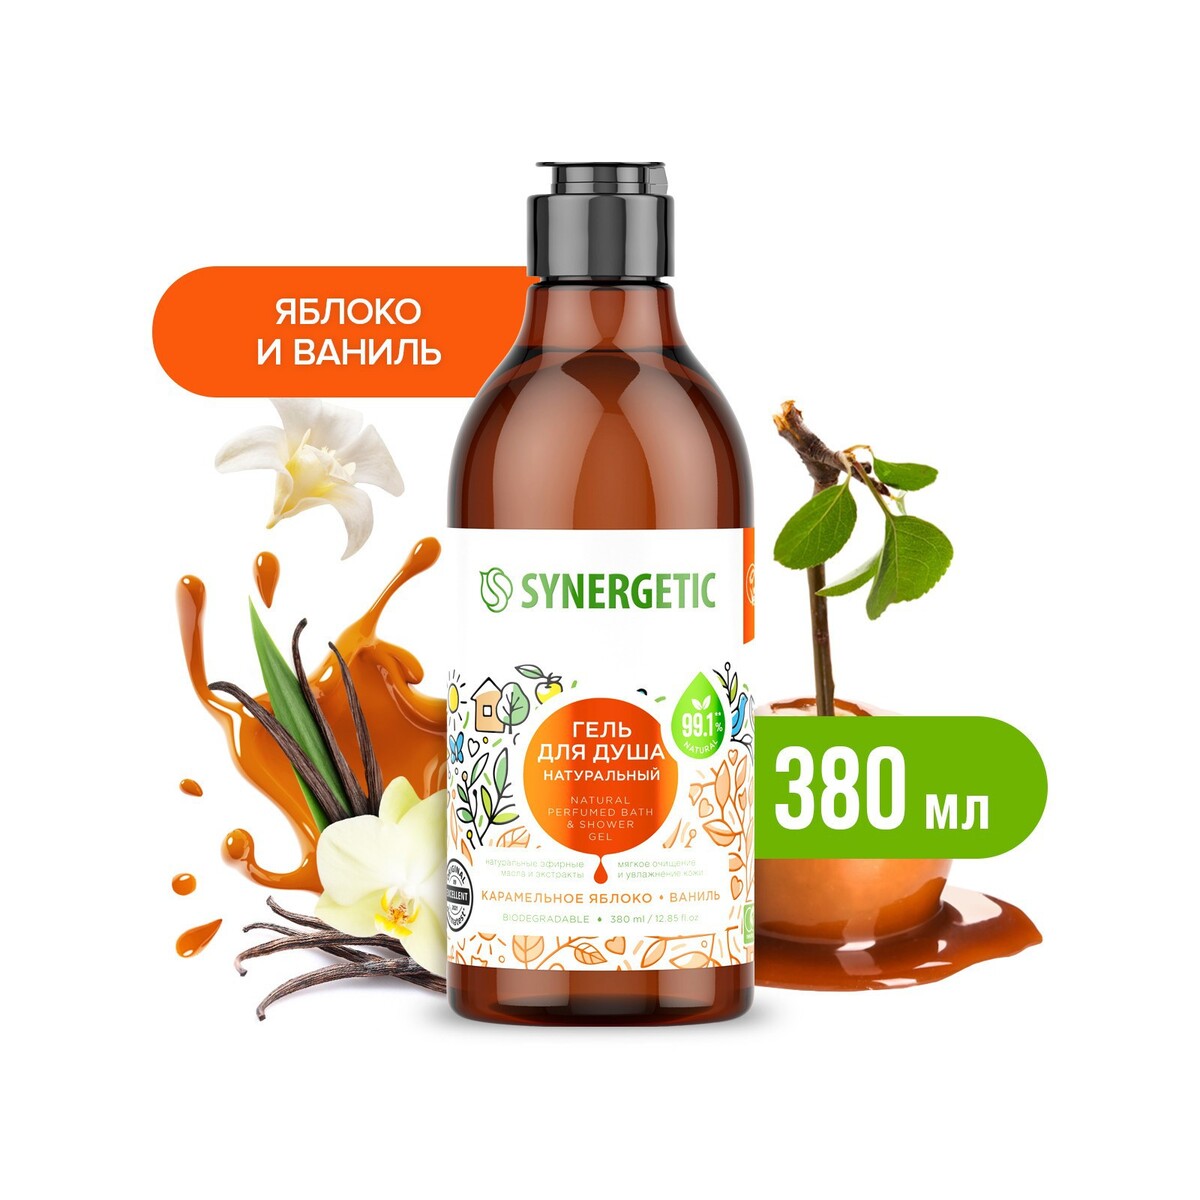    synergetic, ,      , 380 